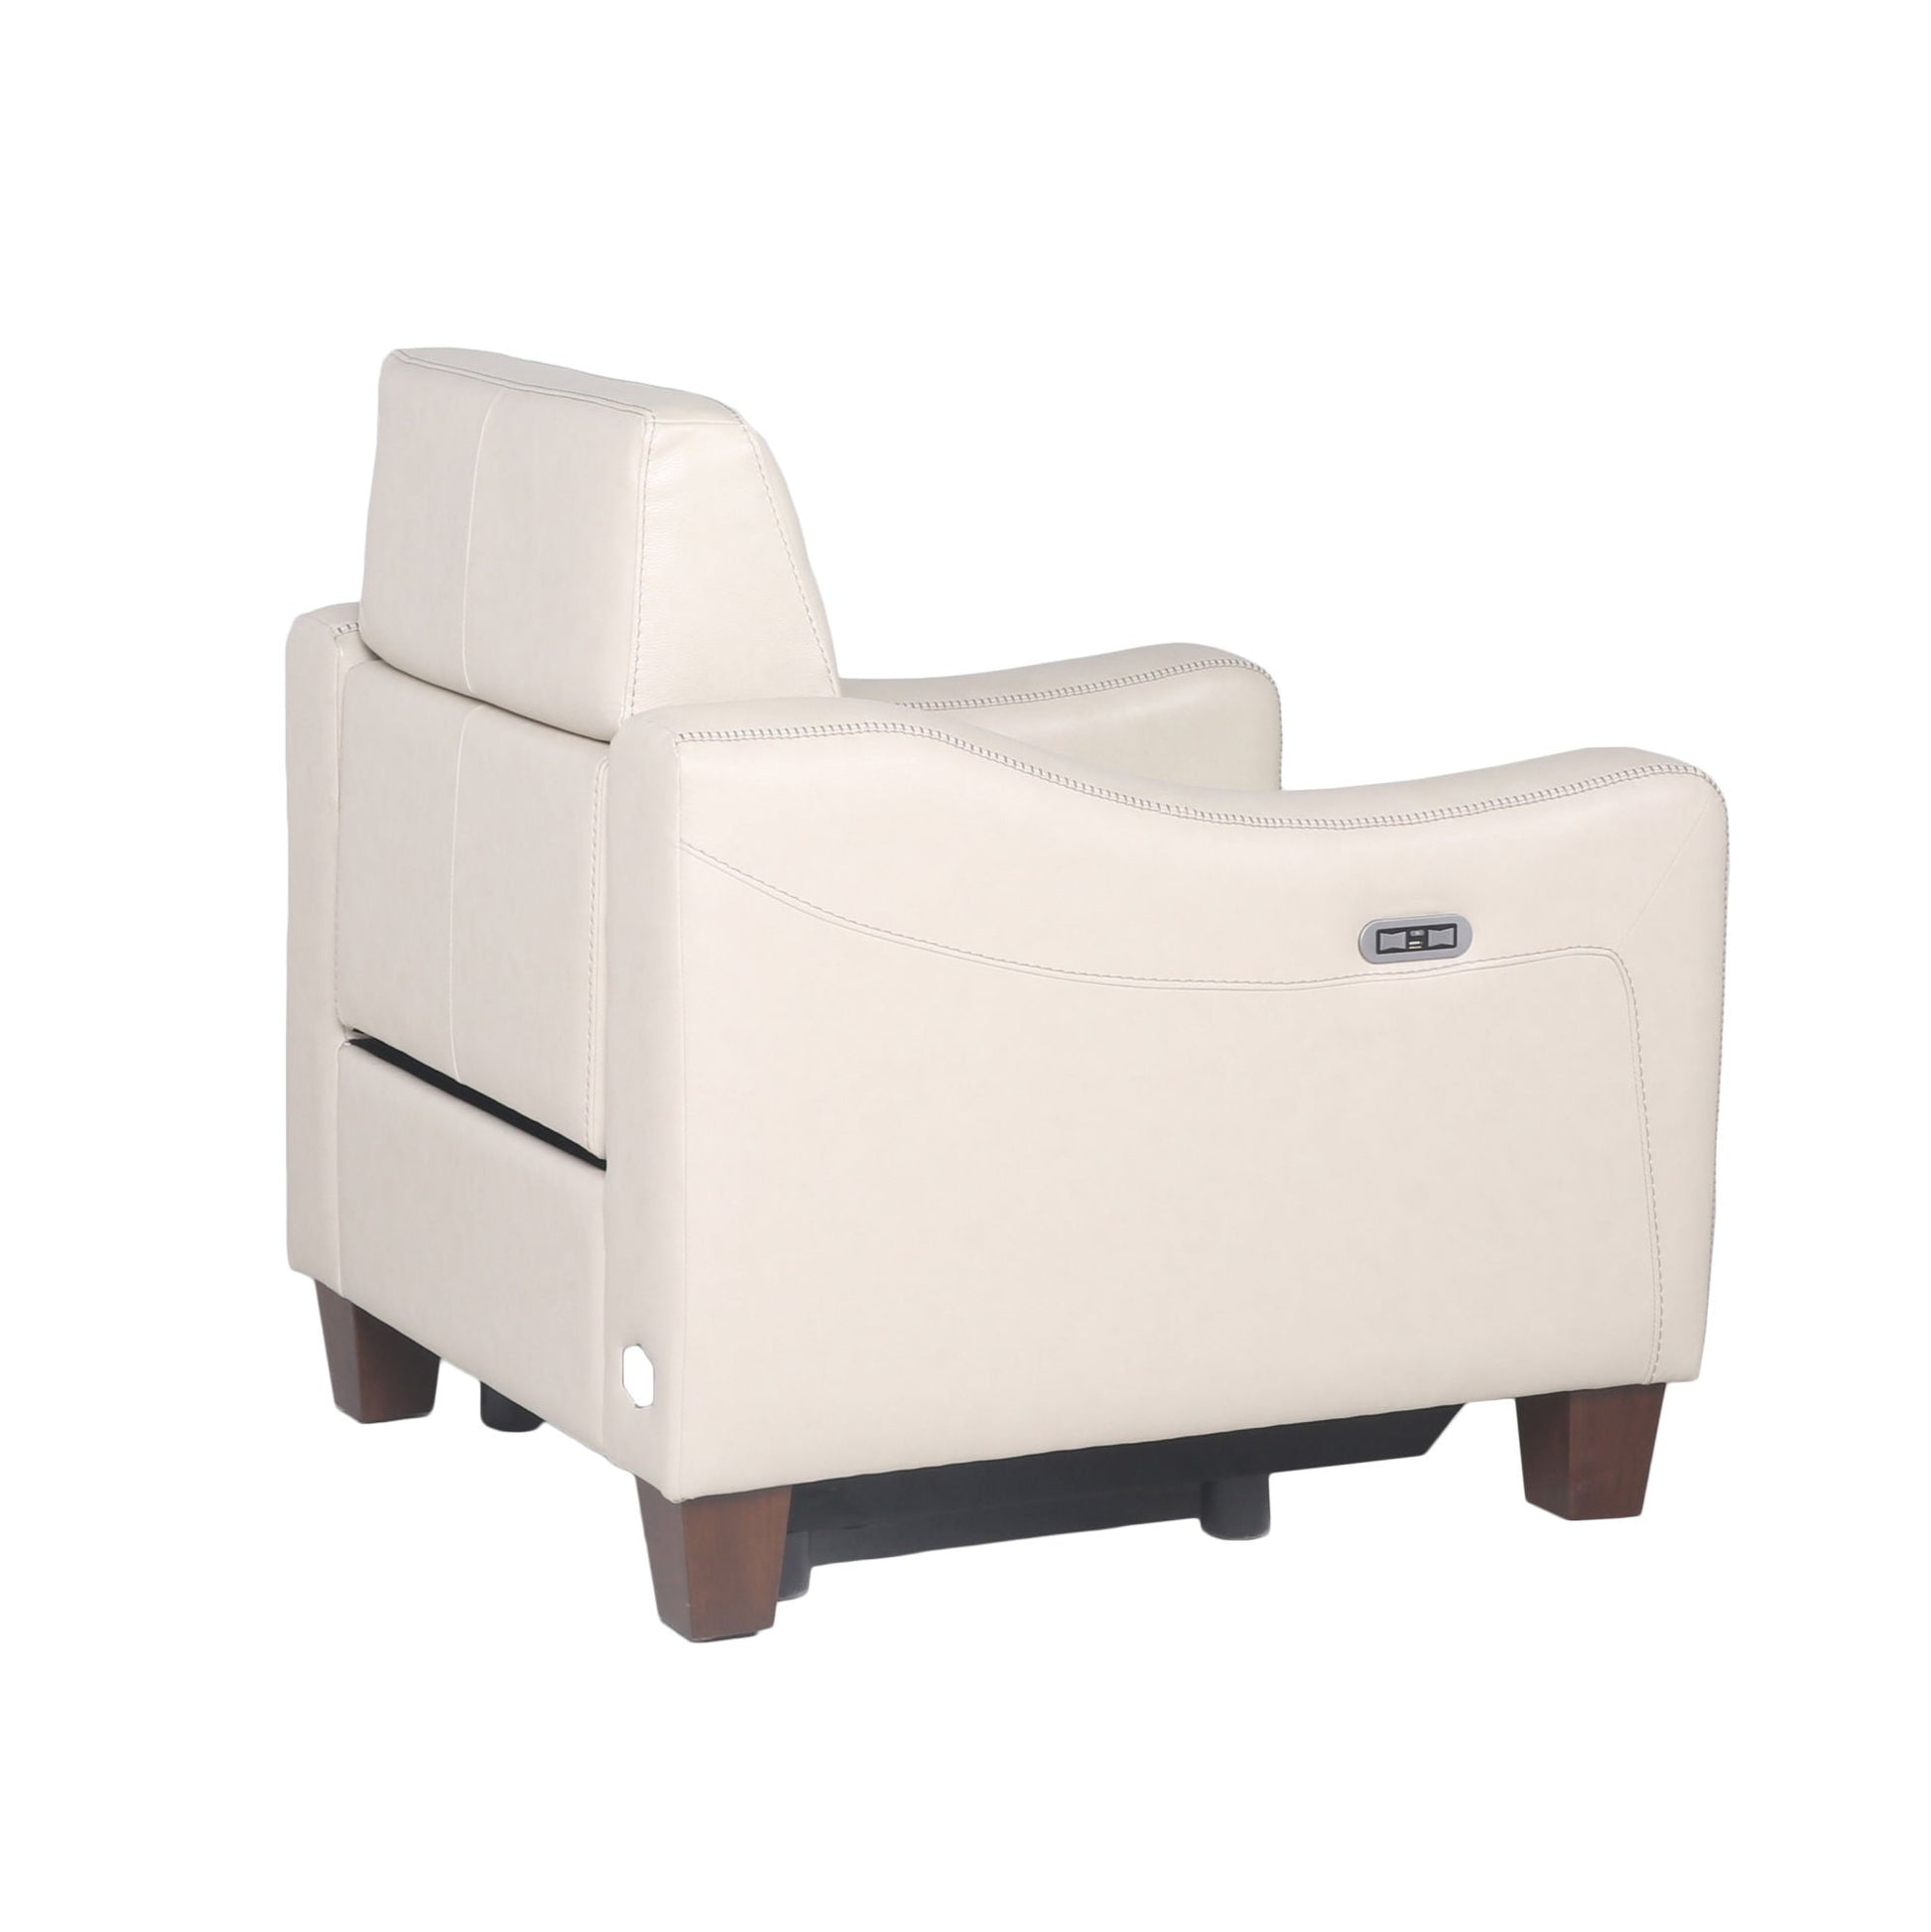 Dual-Power Recliner: Transitional Design, Top Grain Leather, Wall-Saver Mechanism, Comfort in Ivory Home Decor by Design